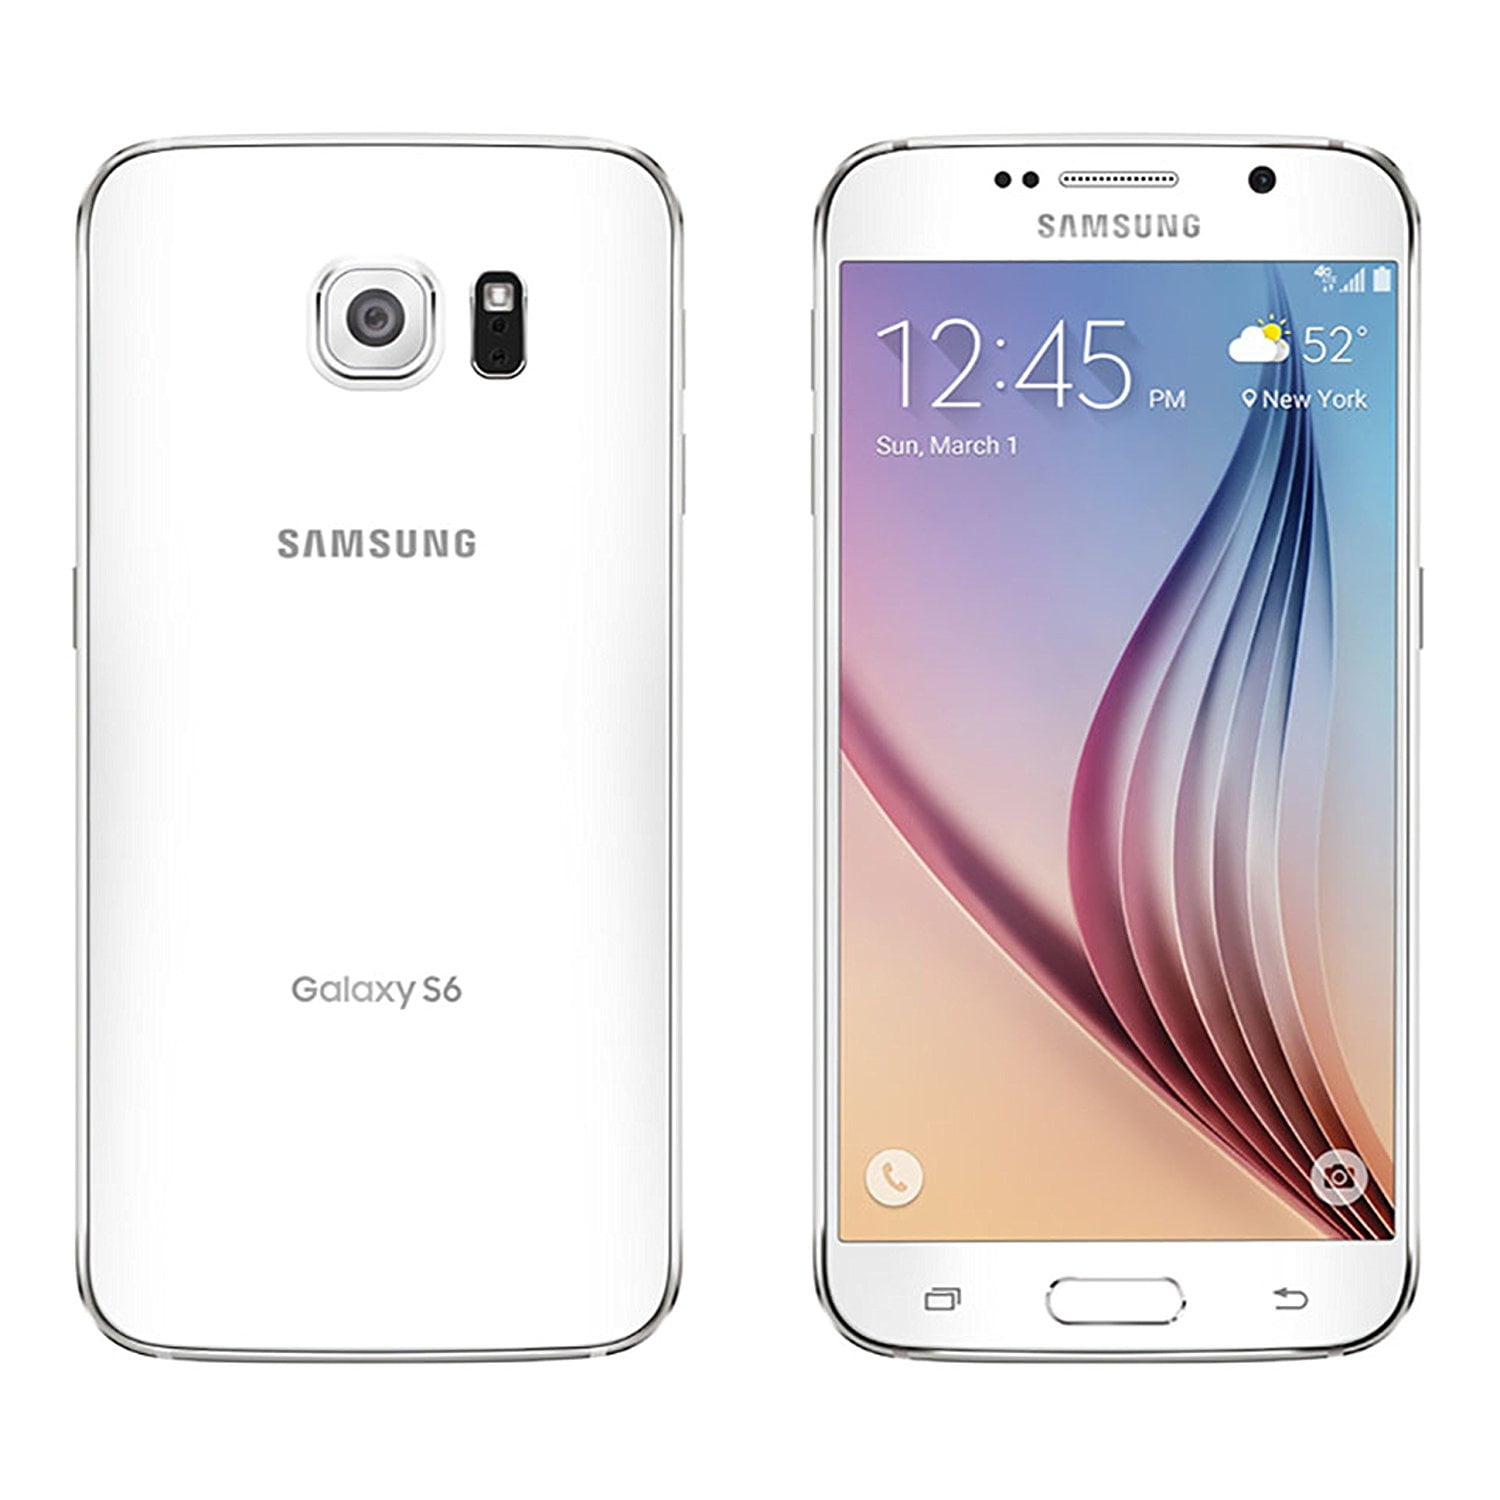 Samsung's new Galaxy S6 and S6 Edge put design first | The Verge